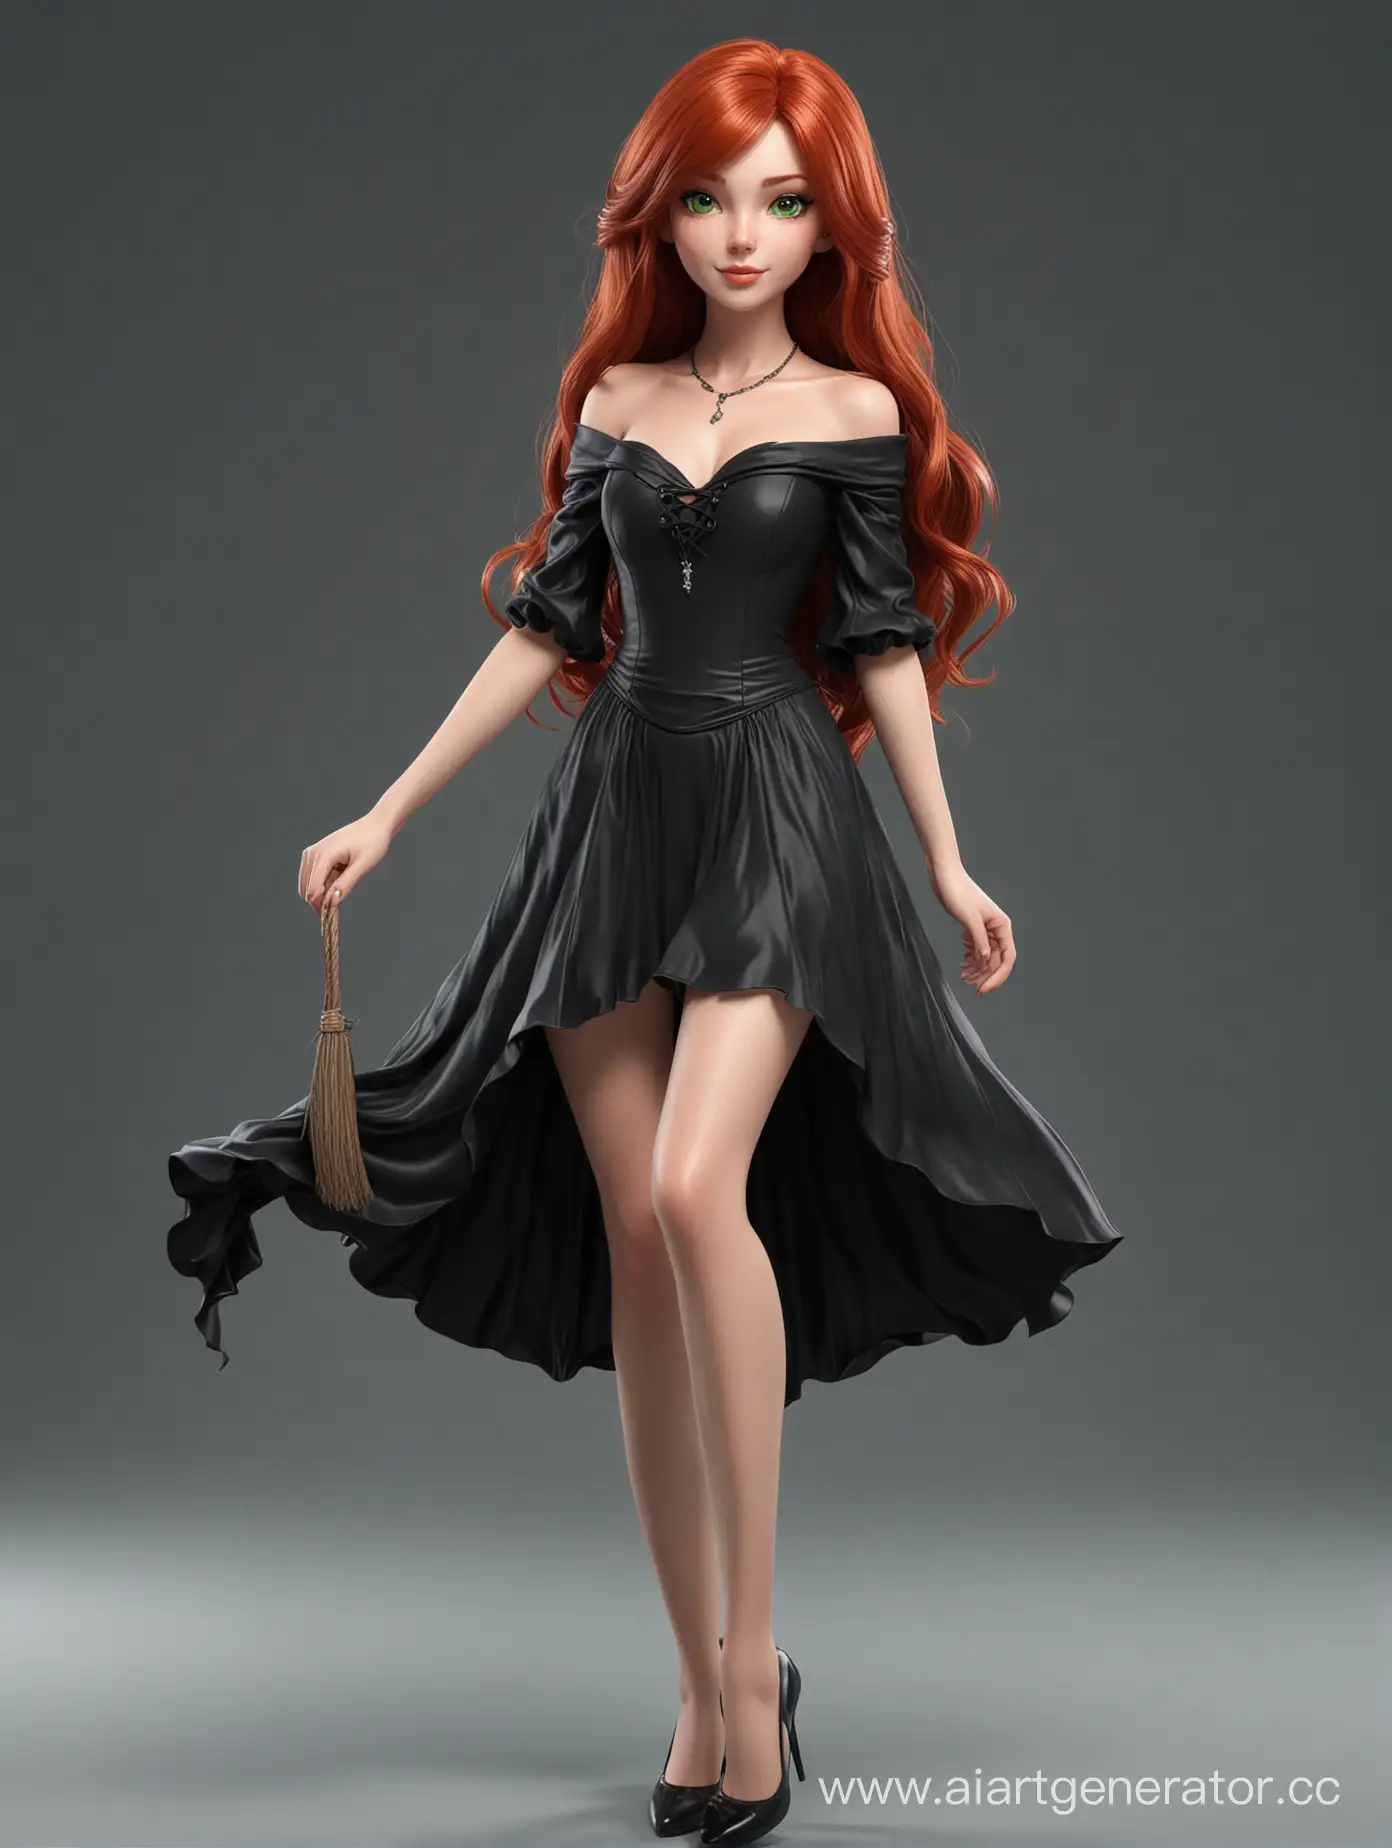 Sexy girl, with beautiful long legs, a witch with red hair, with green eyes in a black dress, very cute, 3D render, cartoon style